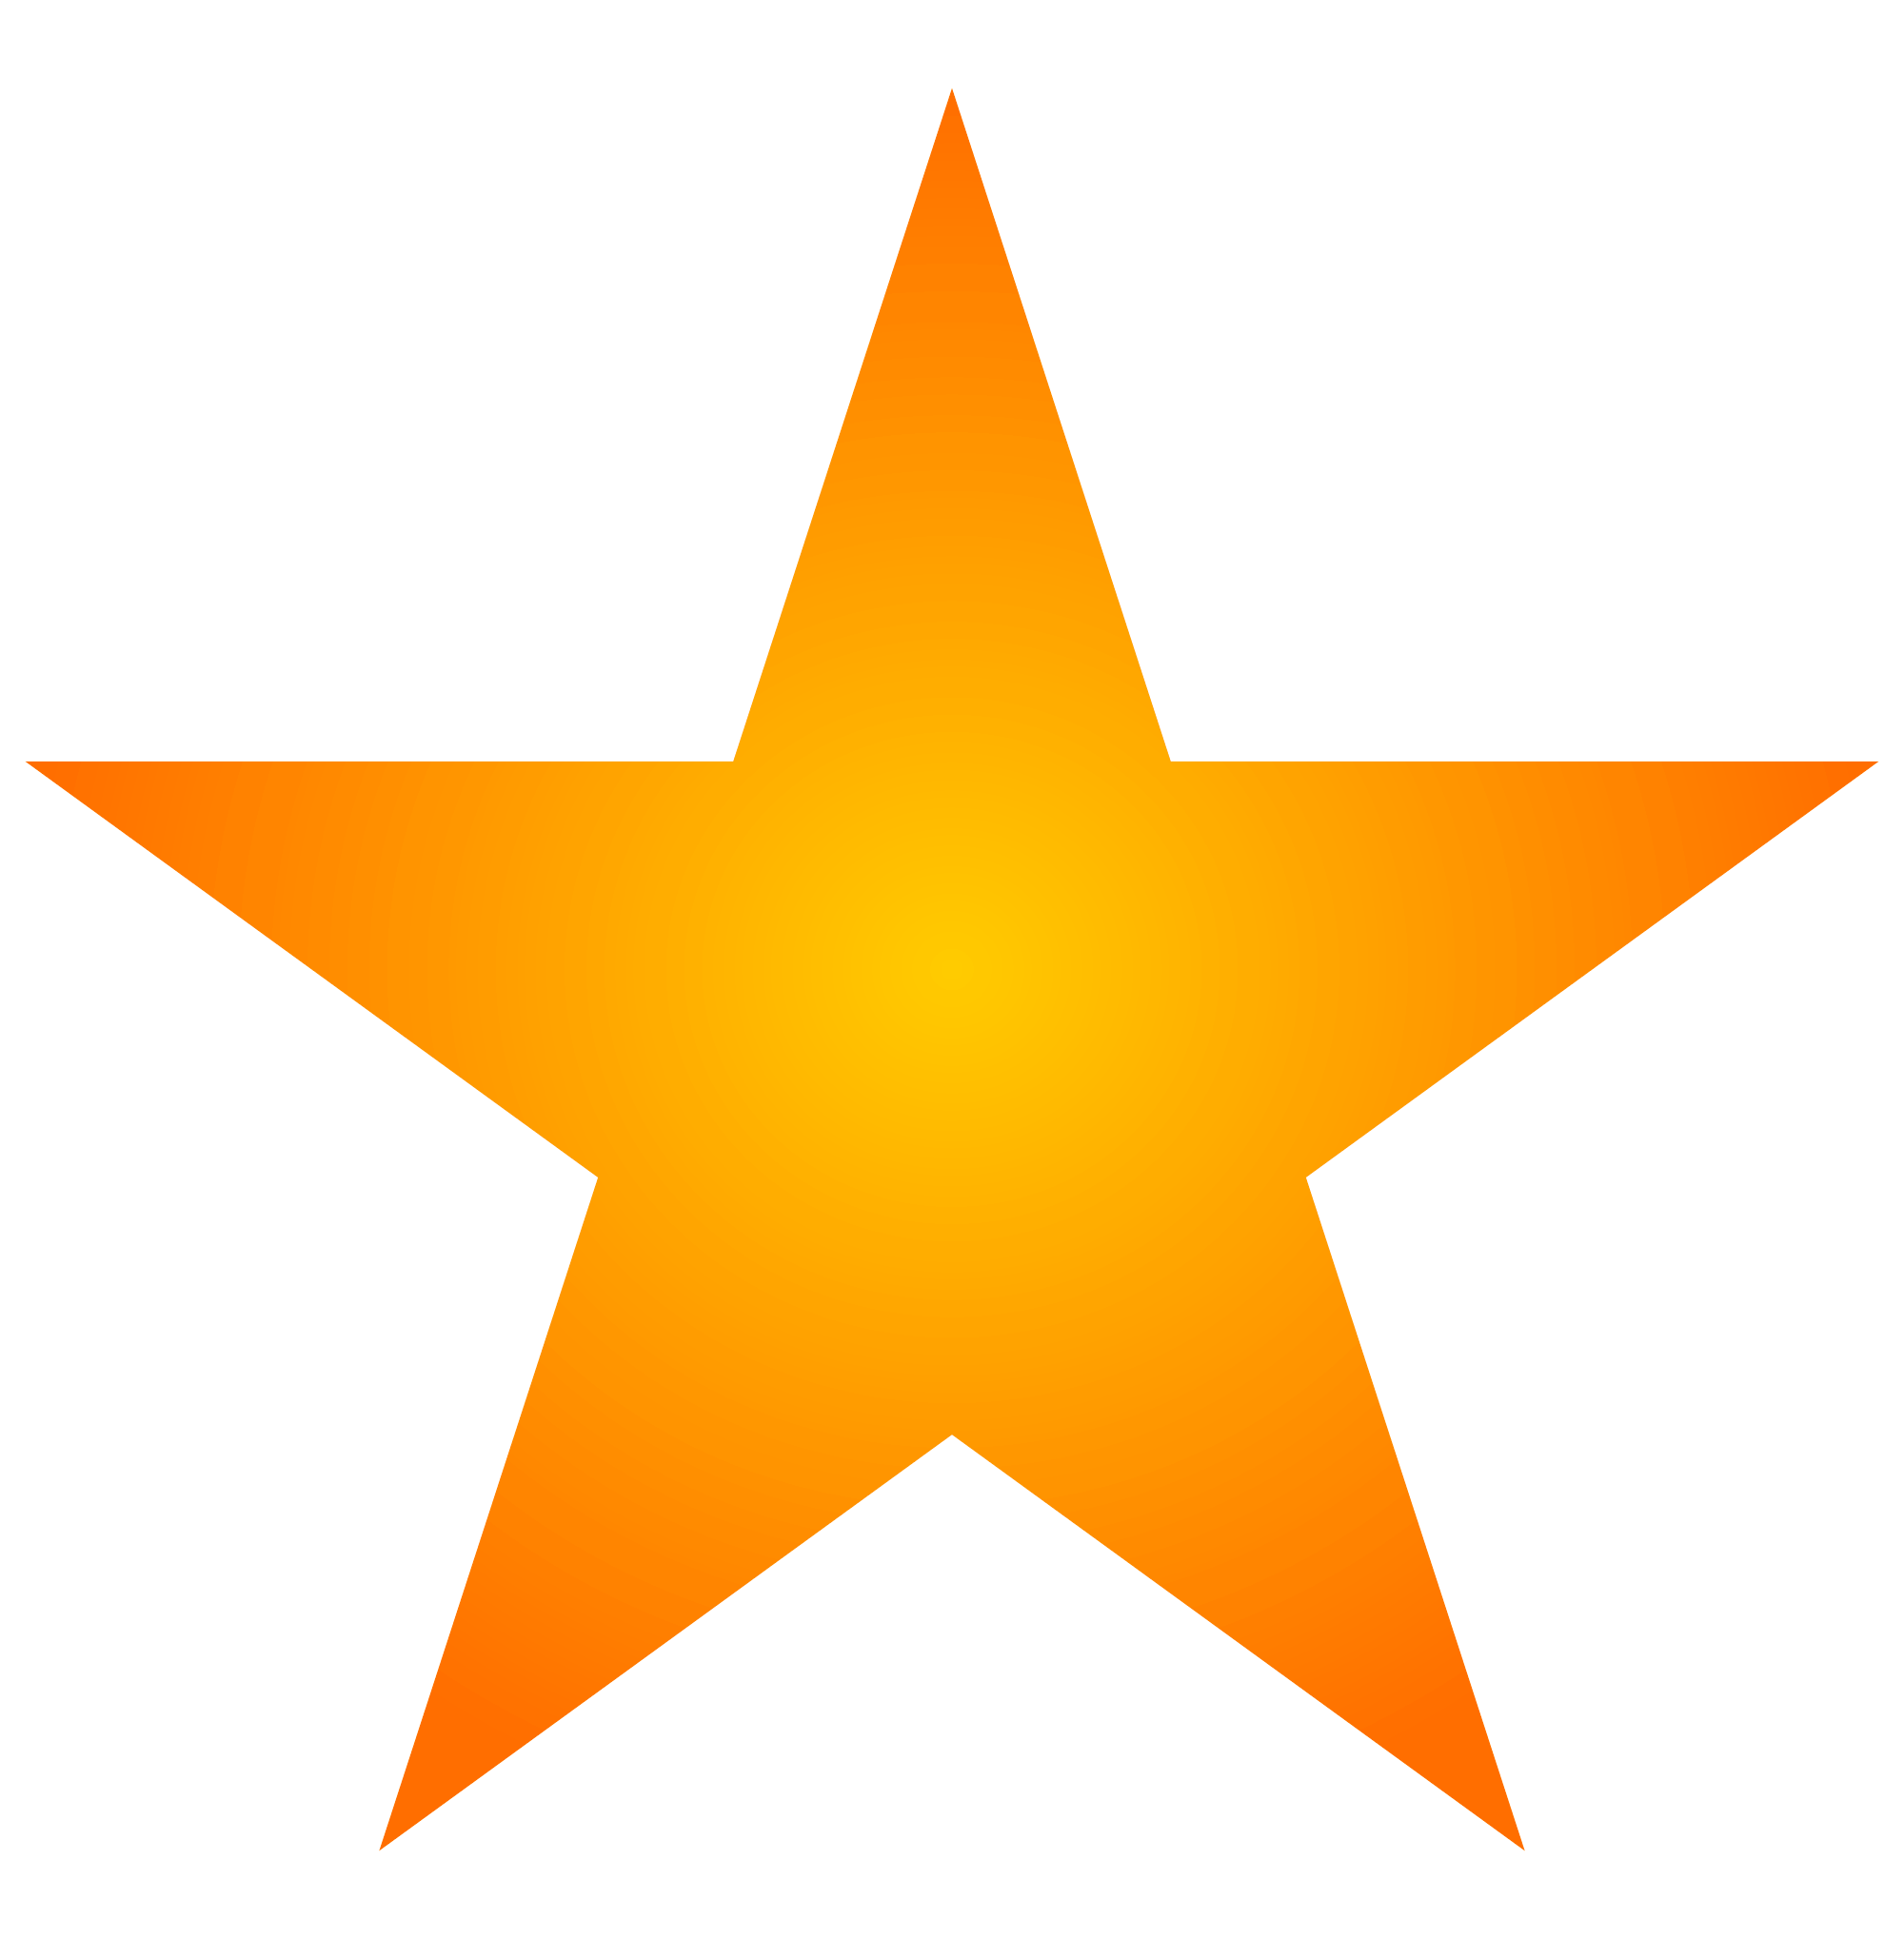 Hq Star Png Transparent Images Free Star Icon Free Transparent Png Logos